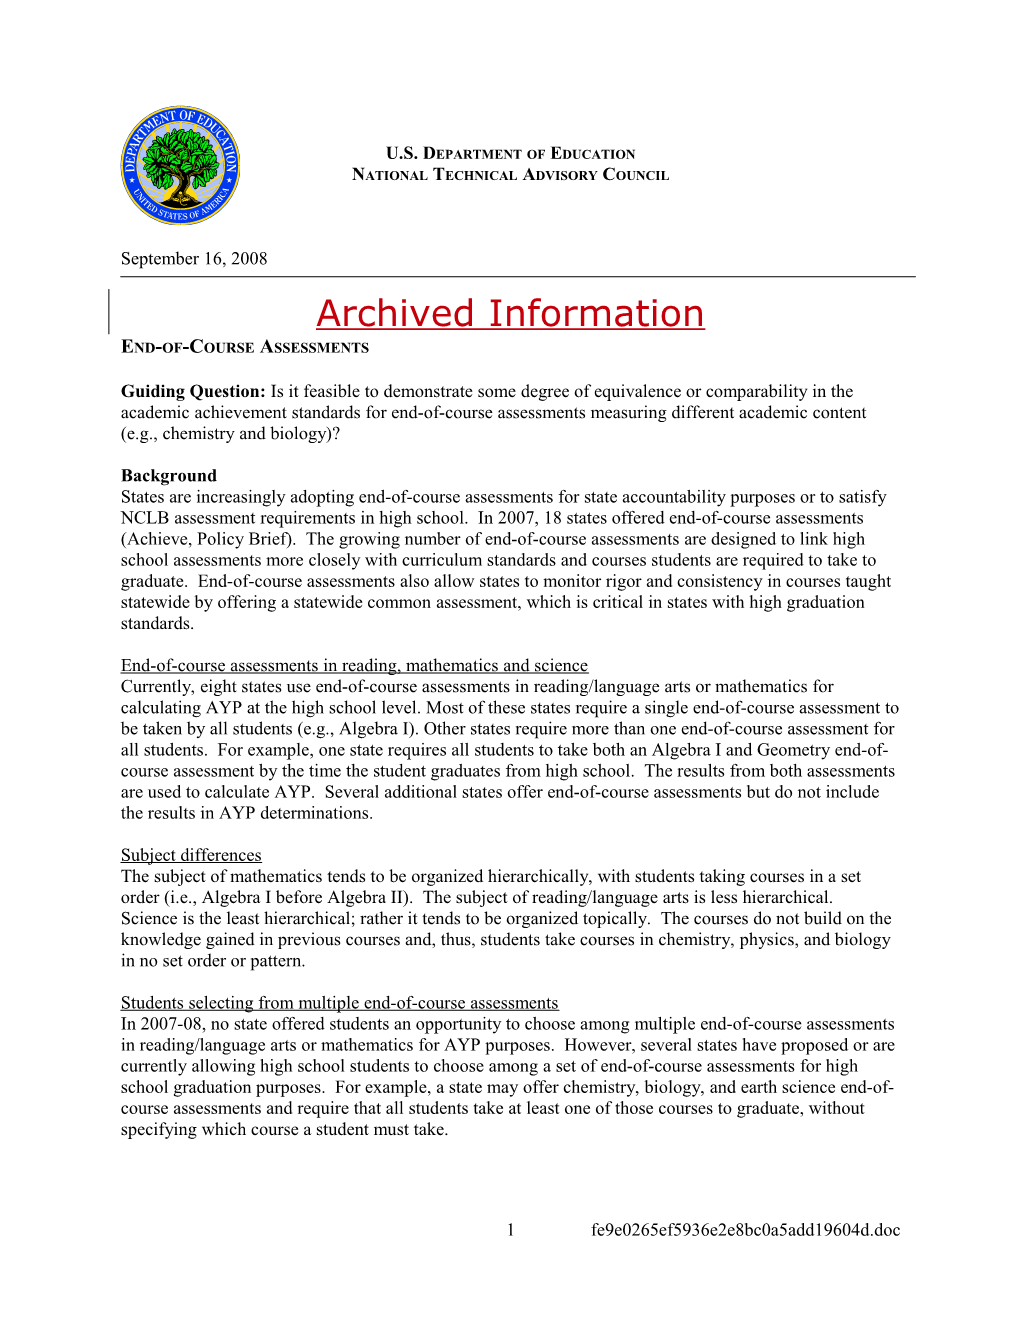 Archived: End-Of-Course Assessments, September 16, 2008 (MS WORD)